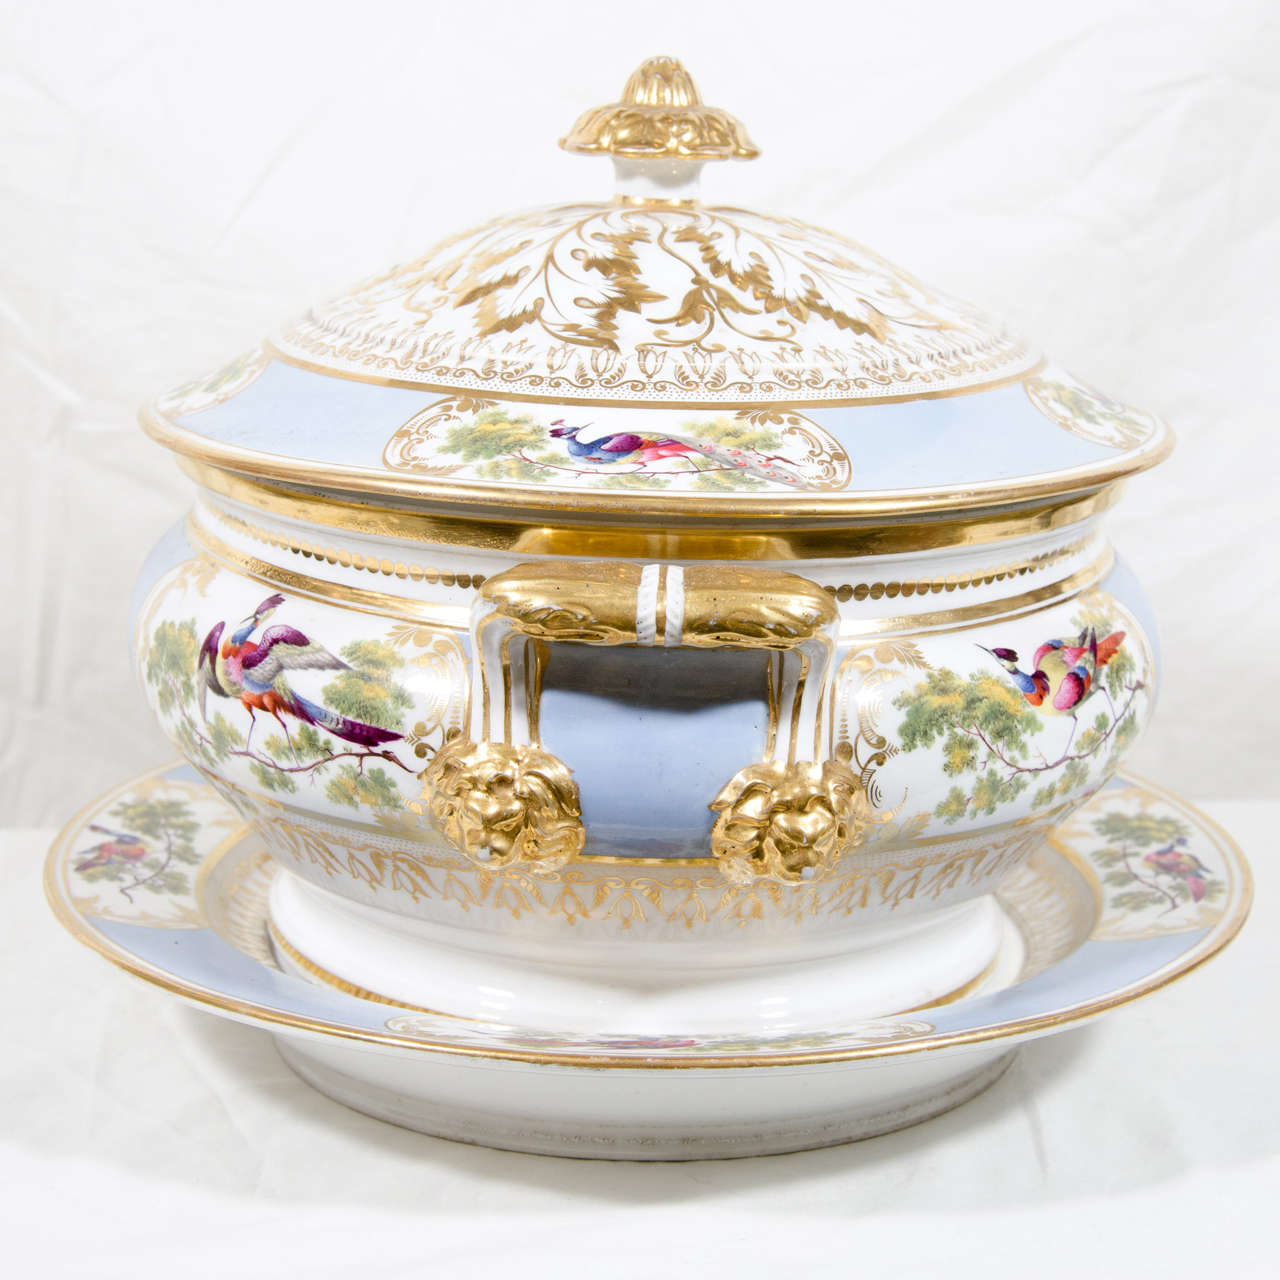 Neoclassical Chamberlain's Worcester Tureen with Armorial of Prescott Family